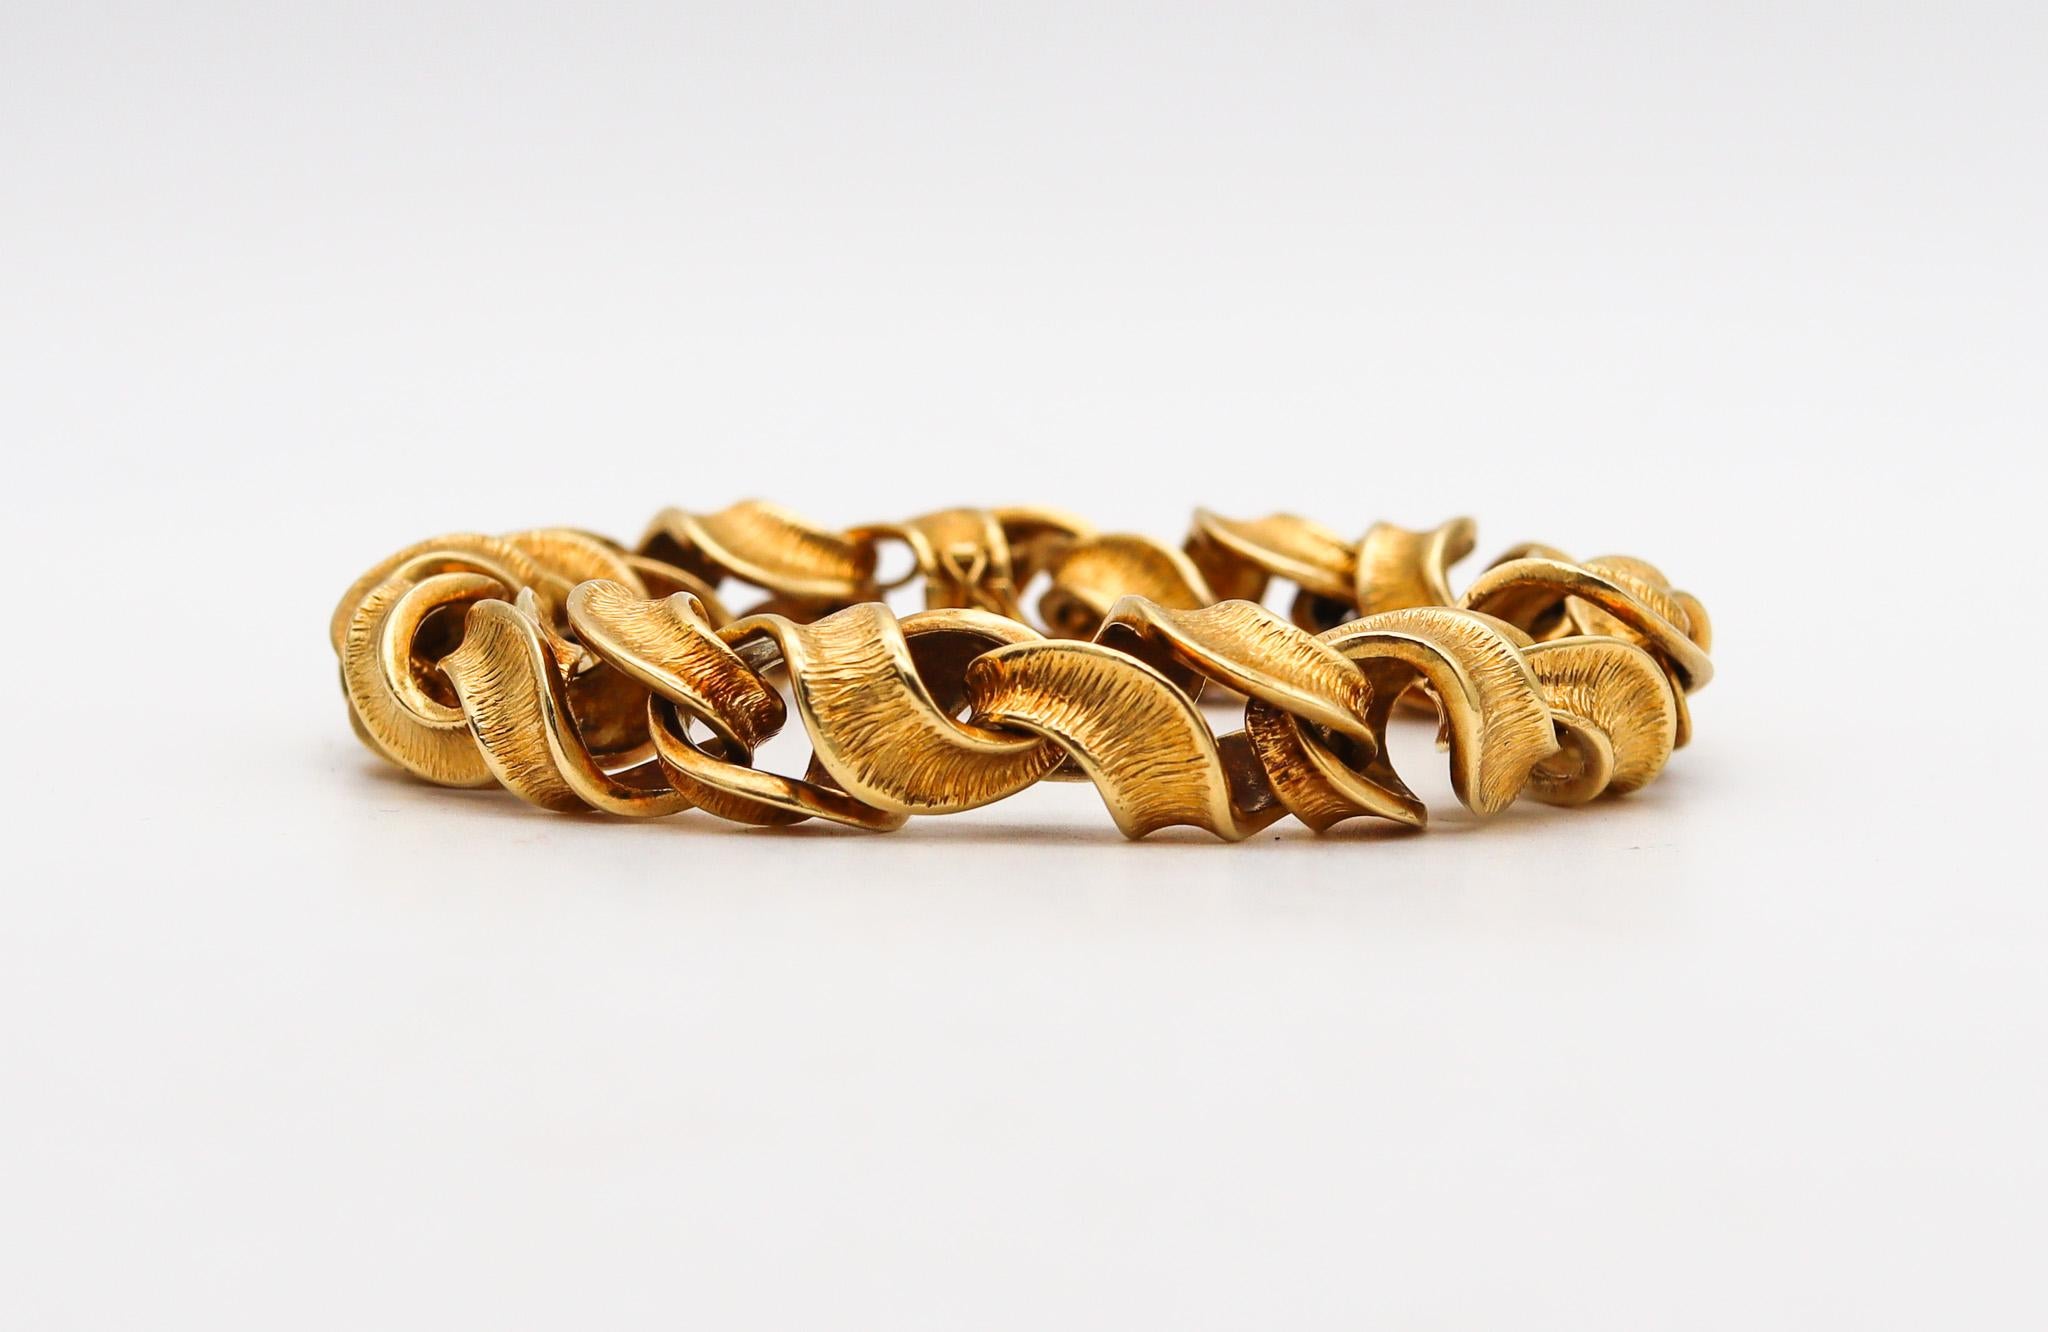 Modernist twisted bracelet designed by Riccardo Masella.

An exceptional massive twisted links bracelet, created in Milano Italy at the jewelry atelier of Riccardo Masella during the mid-century period, back in the 1950. This beautiful and bold